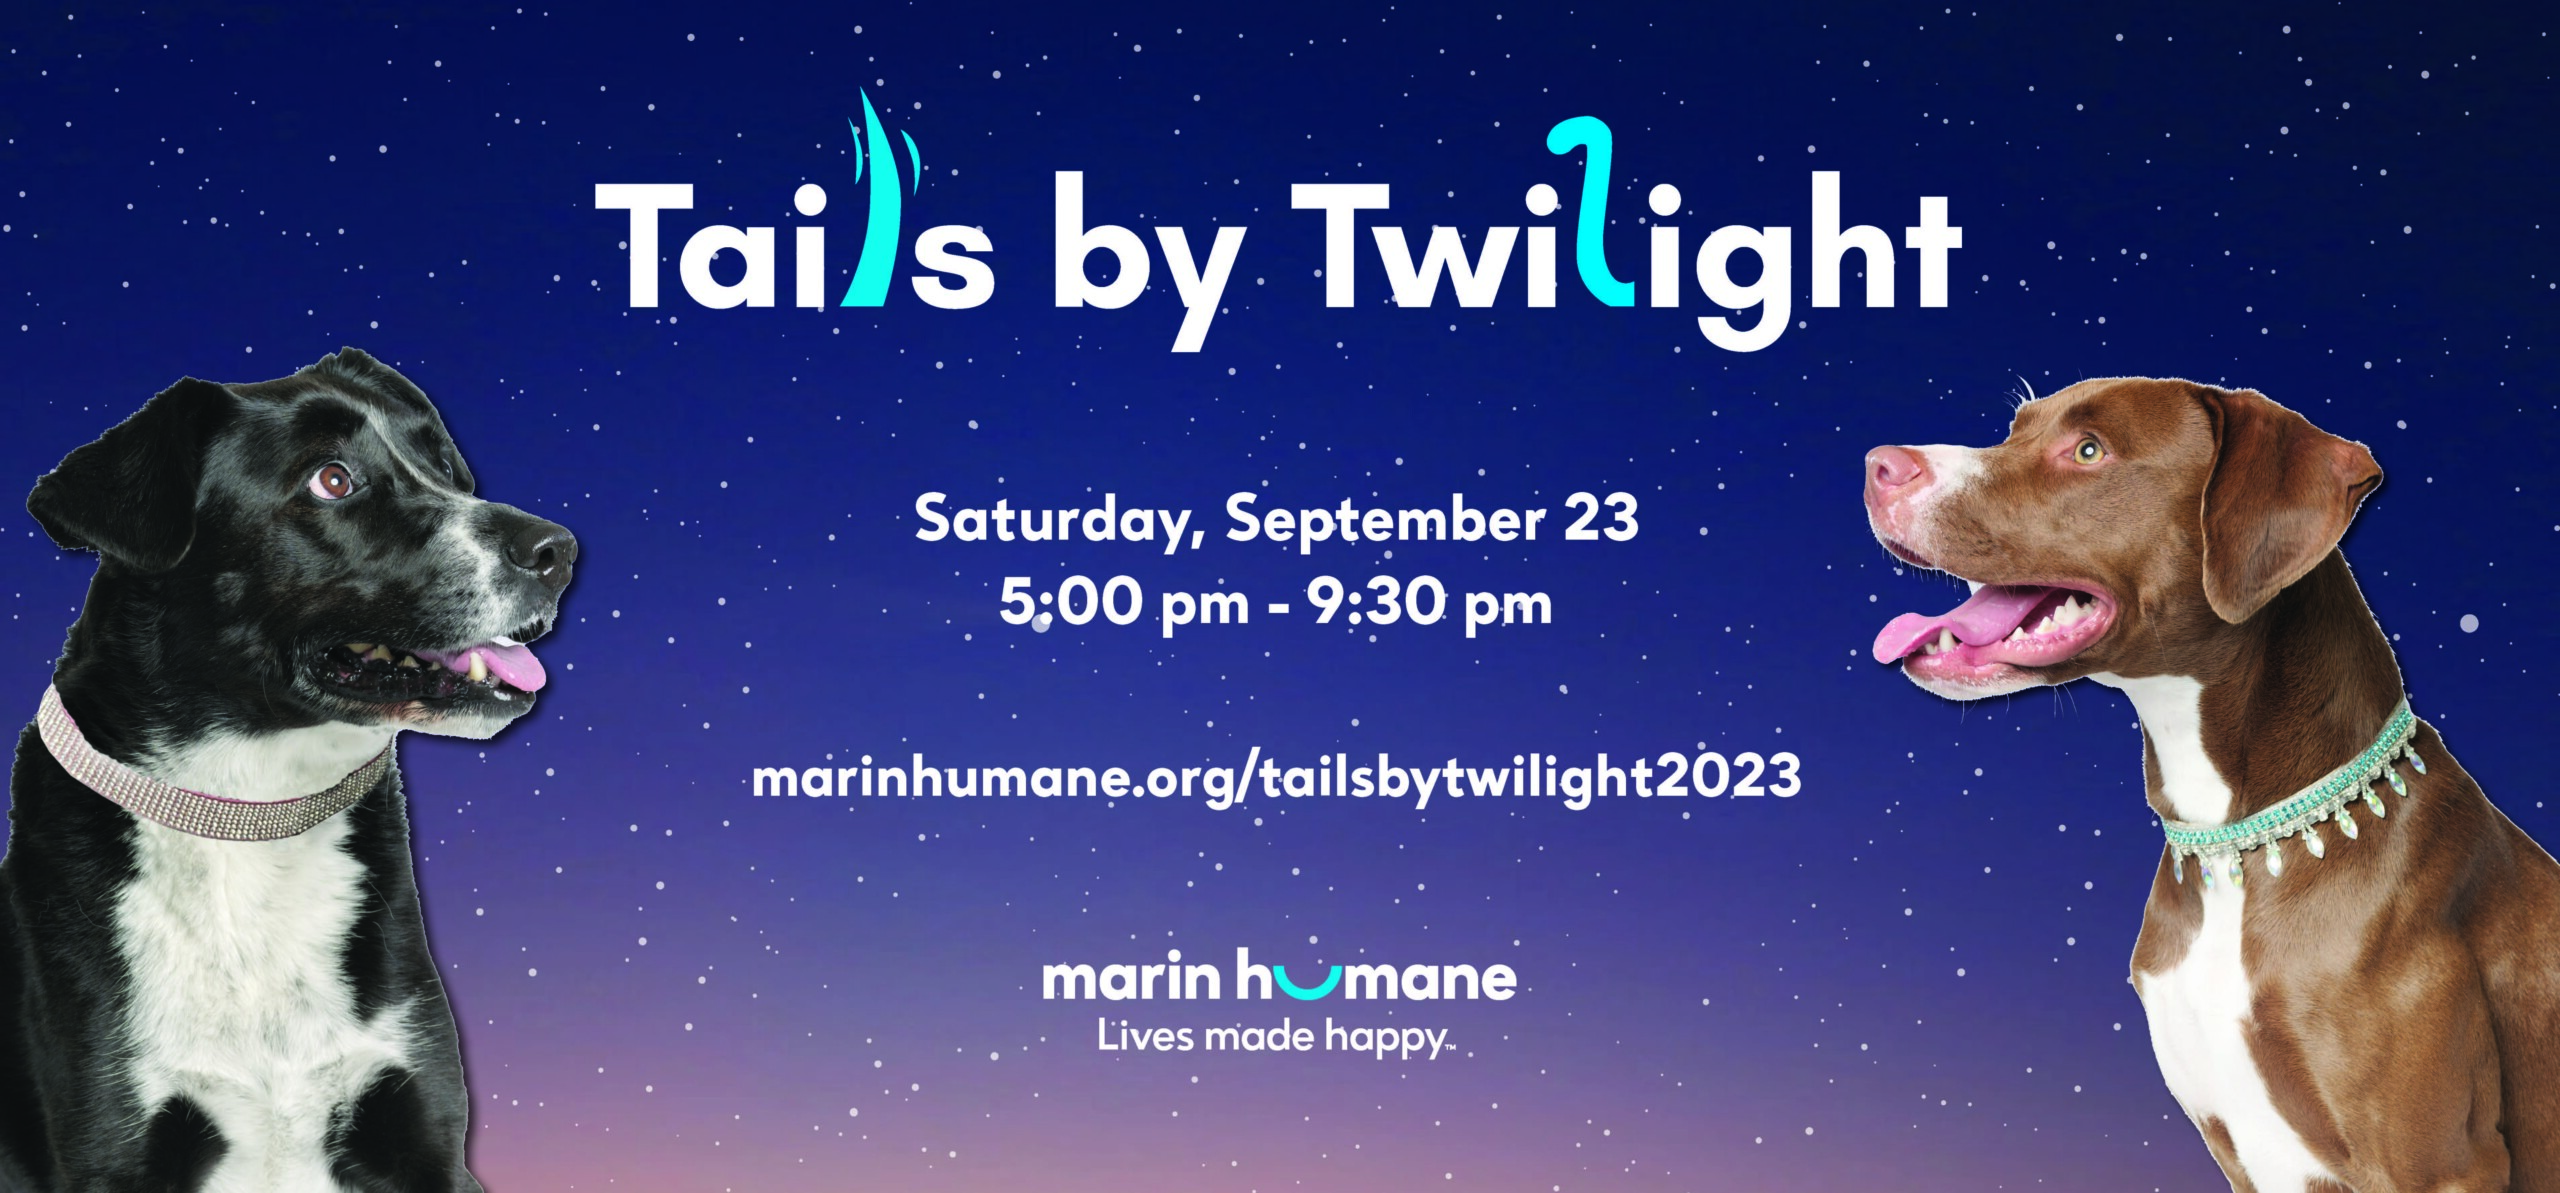 Tails by Twilight at Marin Humane Society